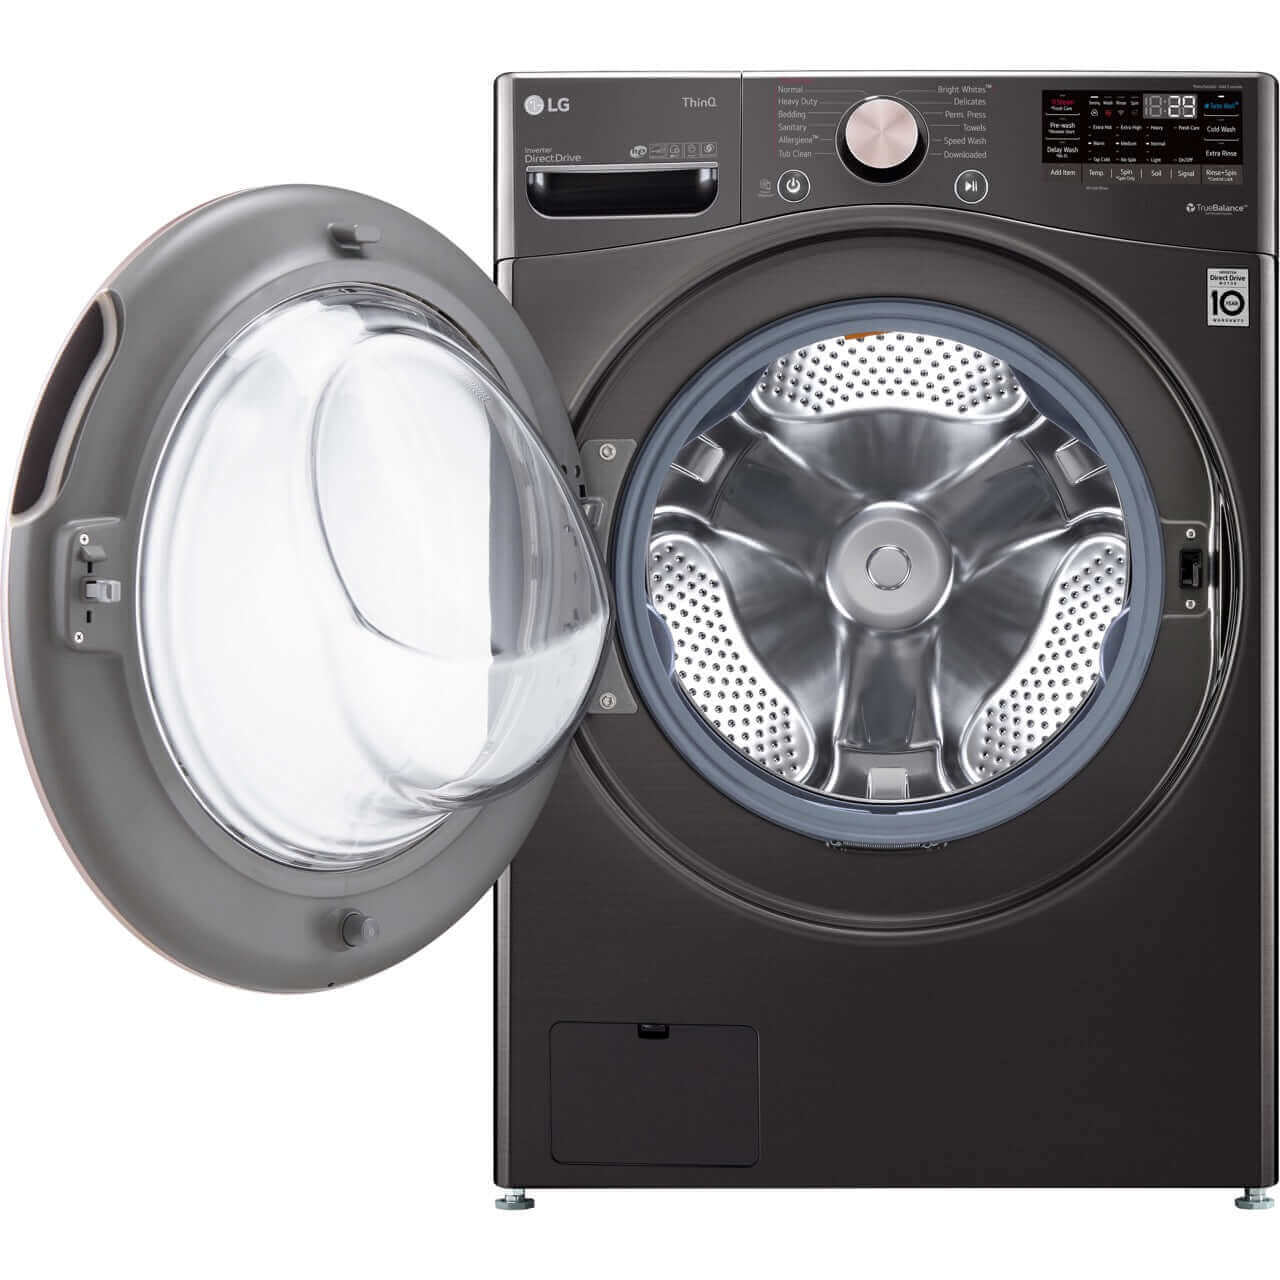 LG 27 In. 4.5-Cu. Ft. Front Load Washer with Steam Technology in Black Steel (WM4000HBA)